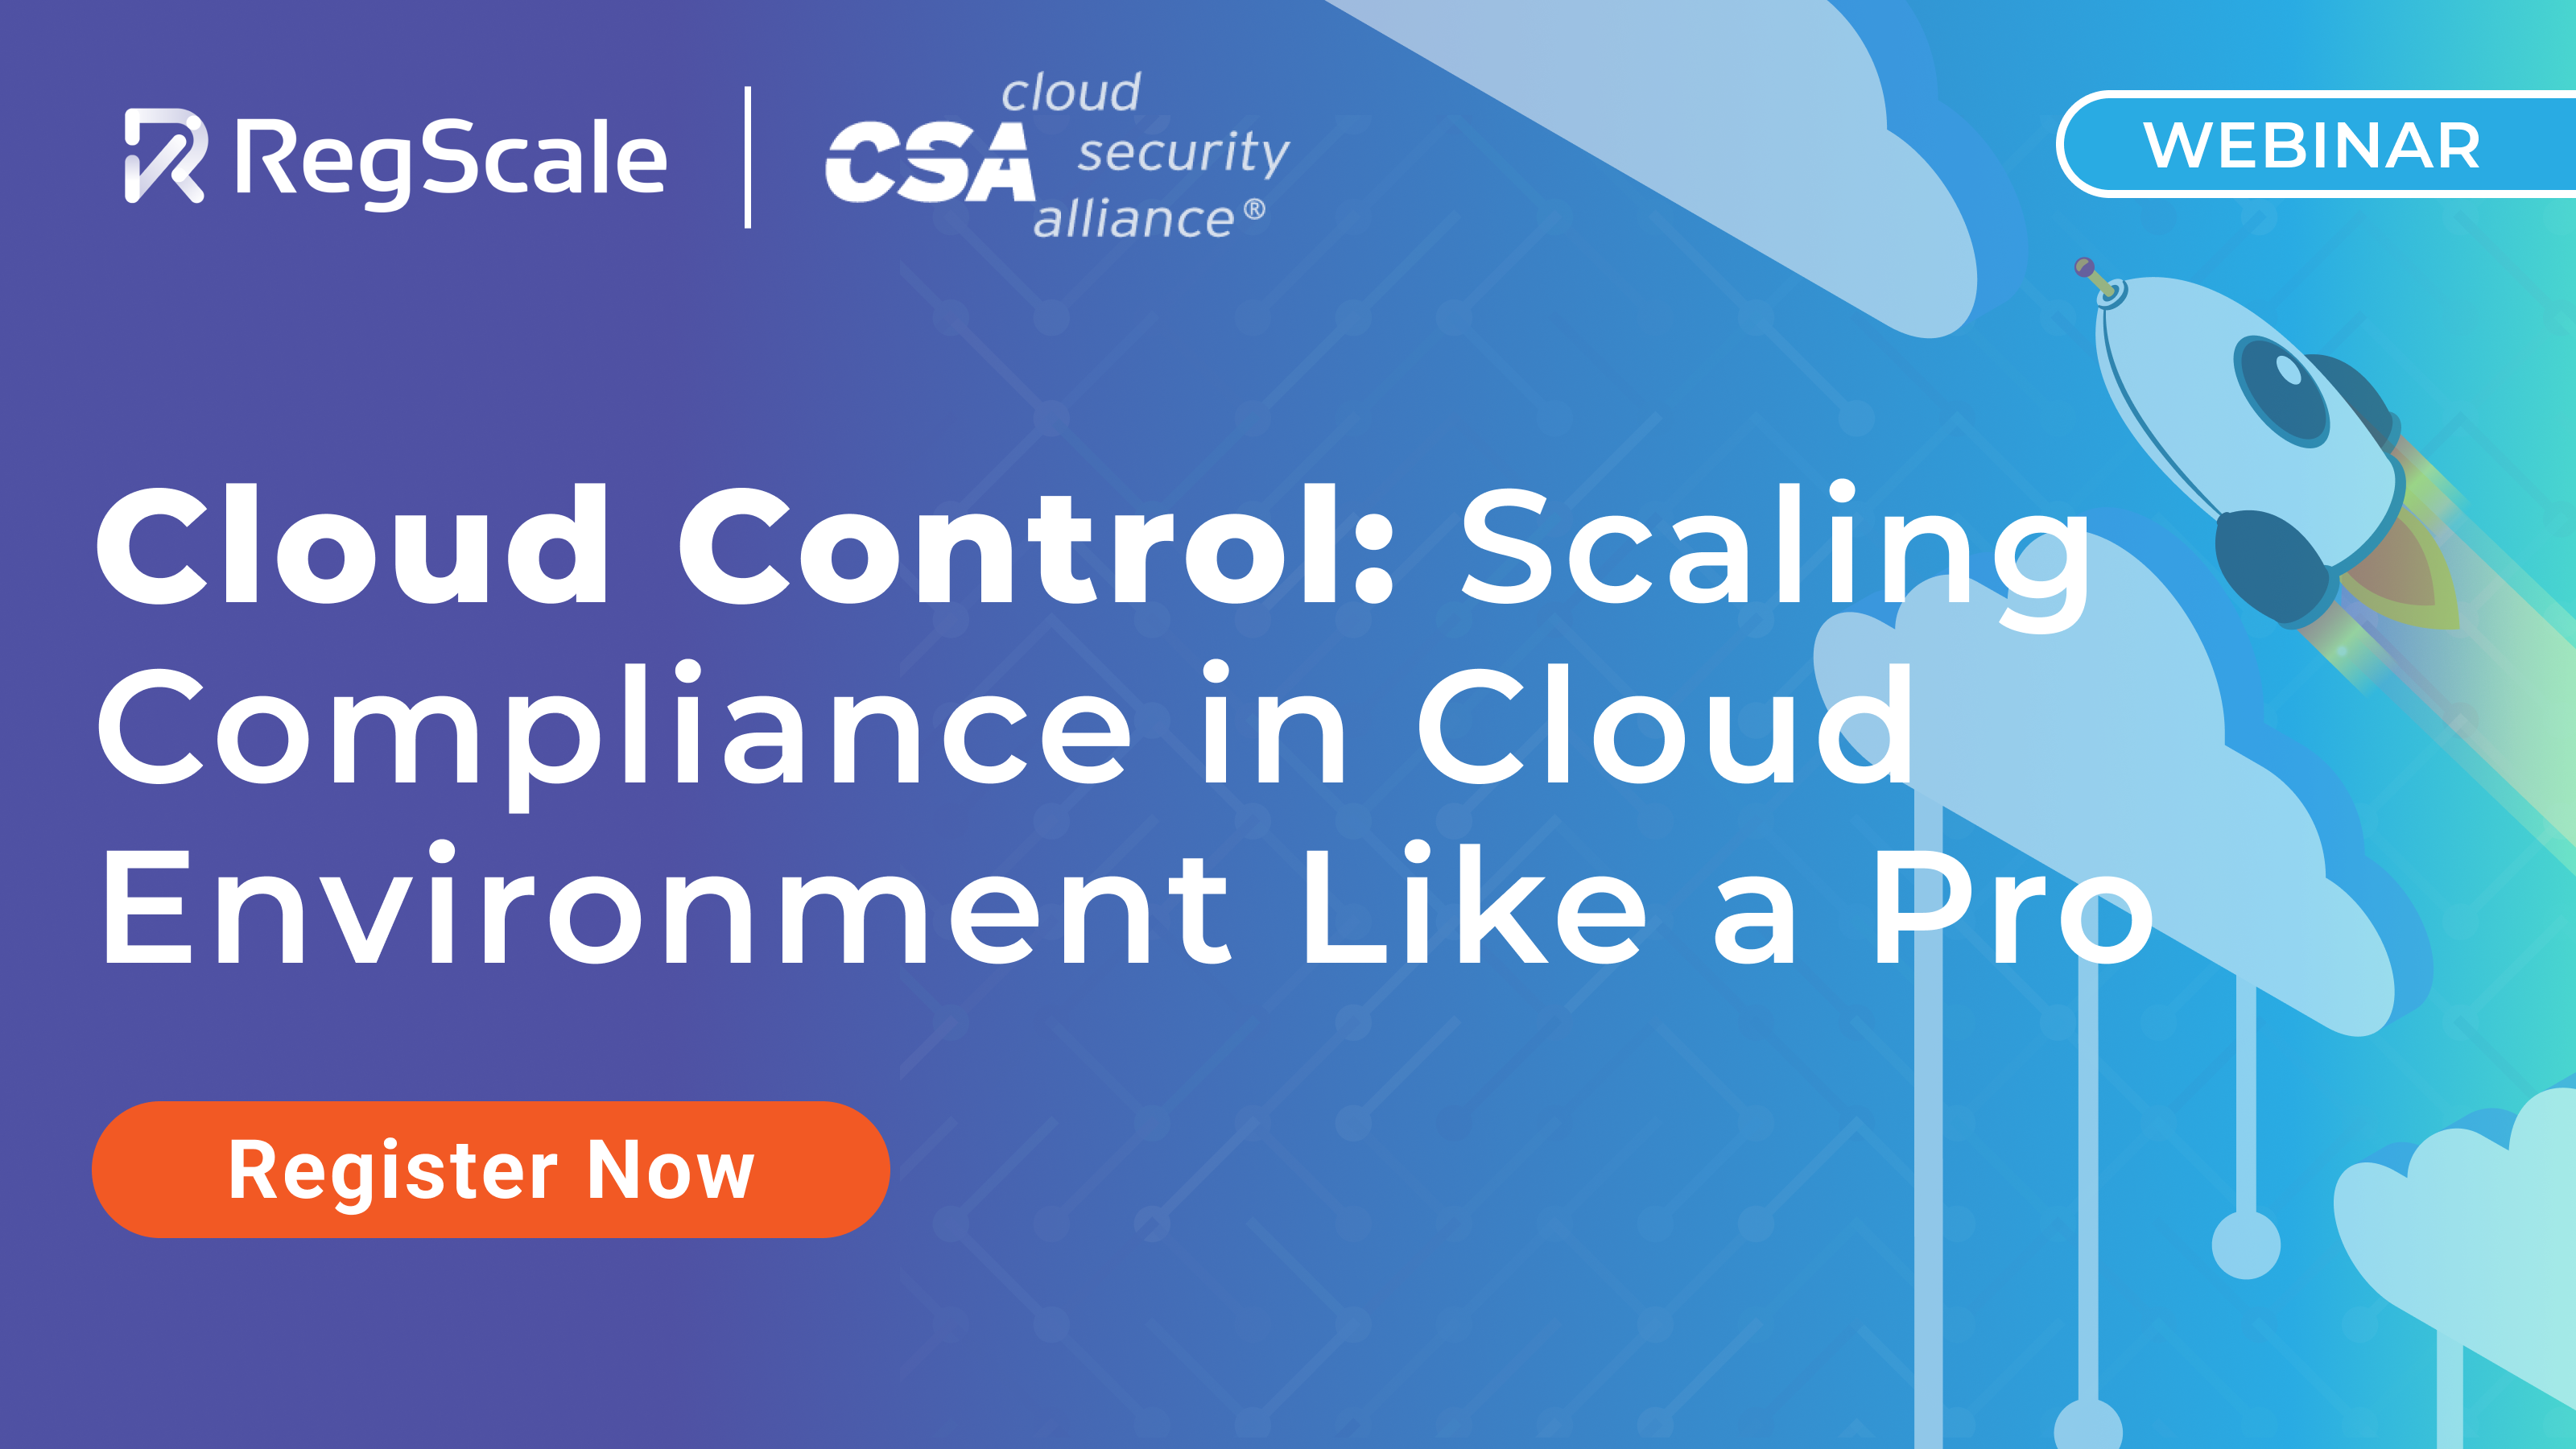 Cloud Control: Scaling Compliance in Cloud Environments Like a Pro